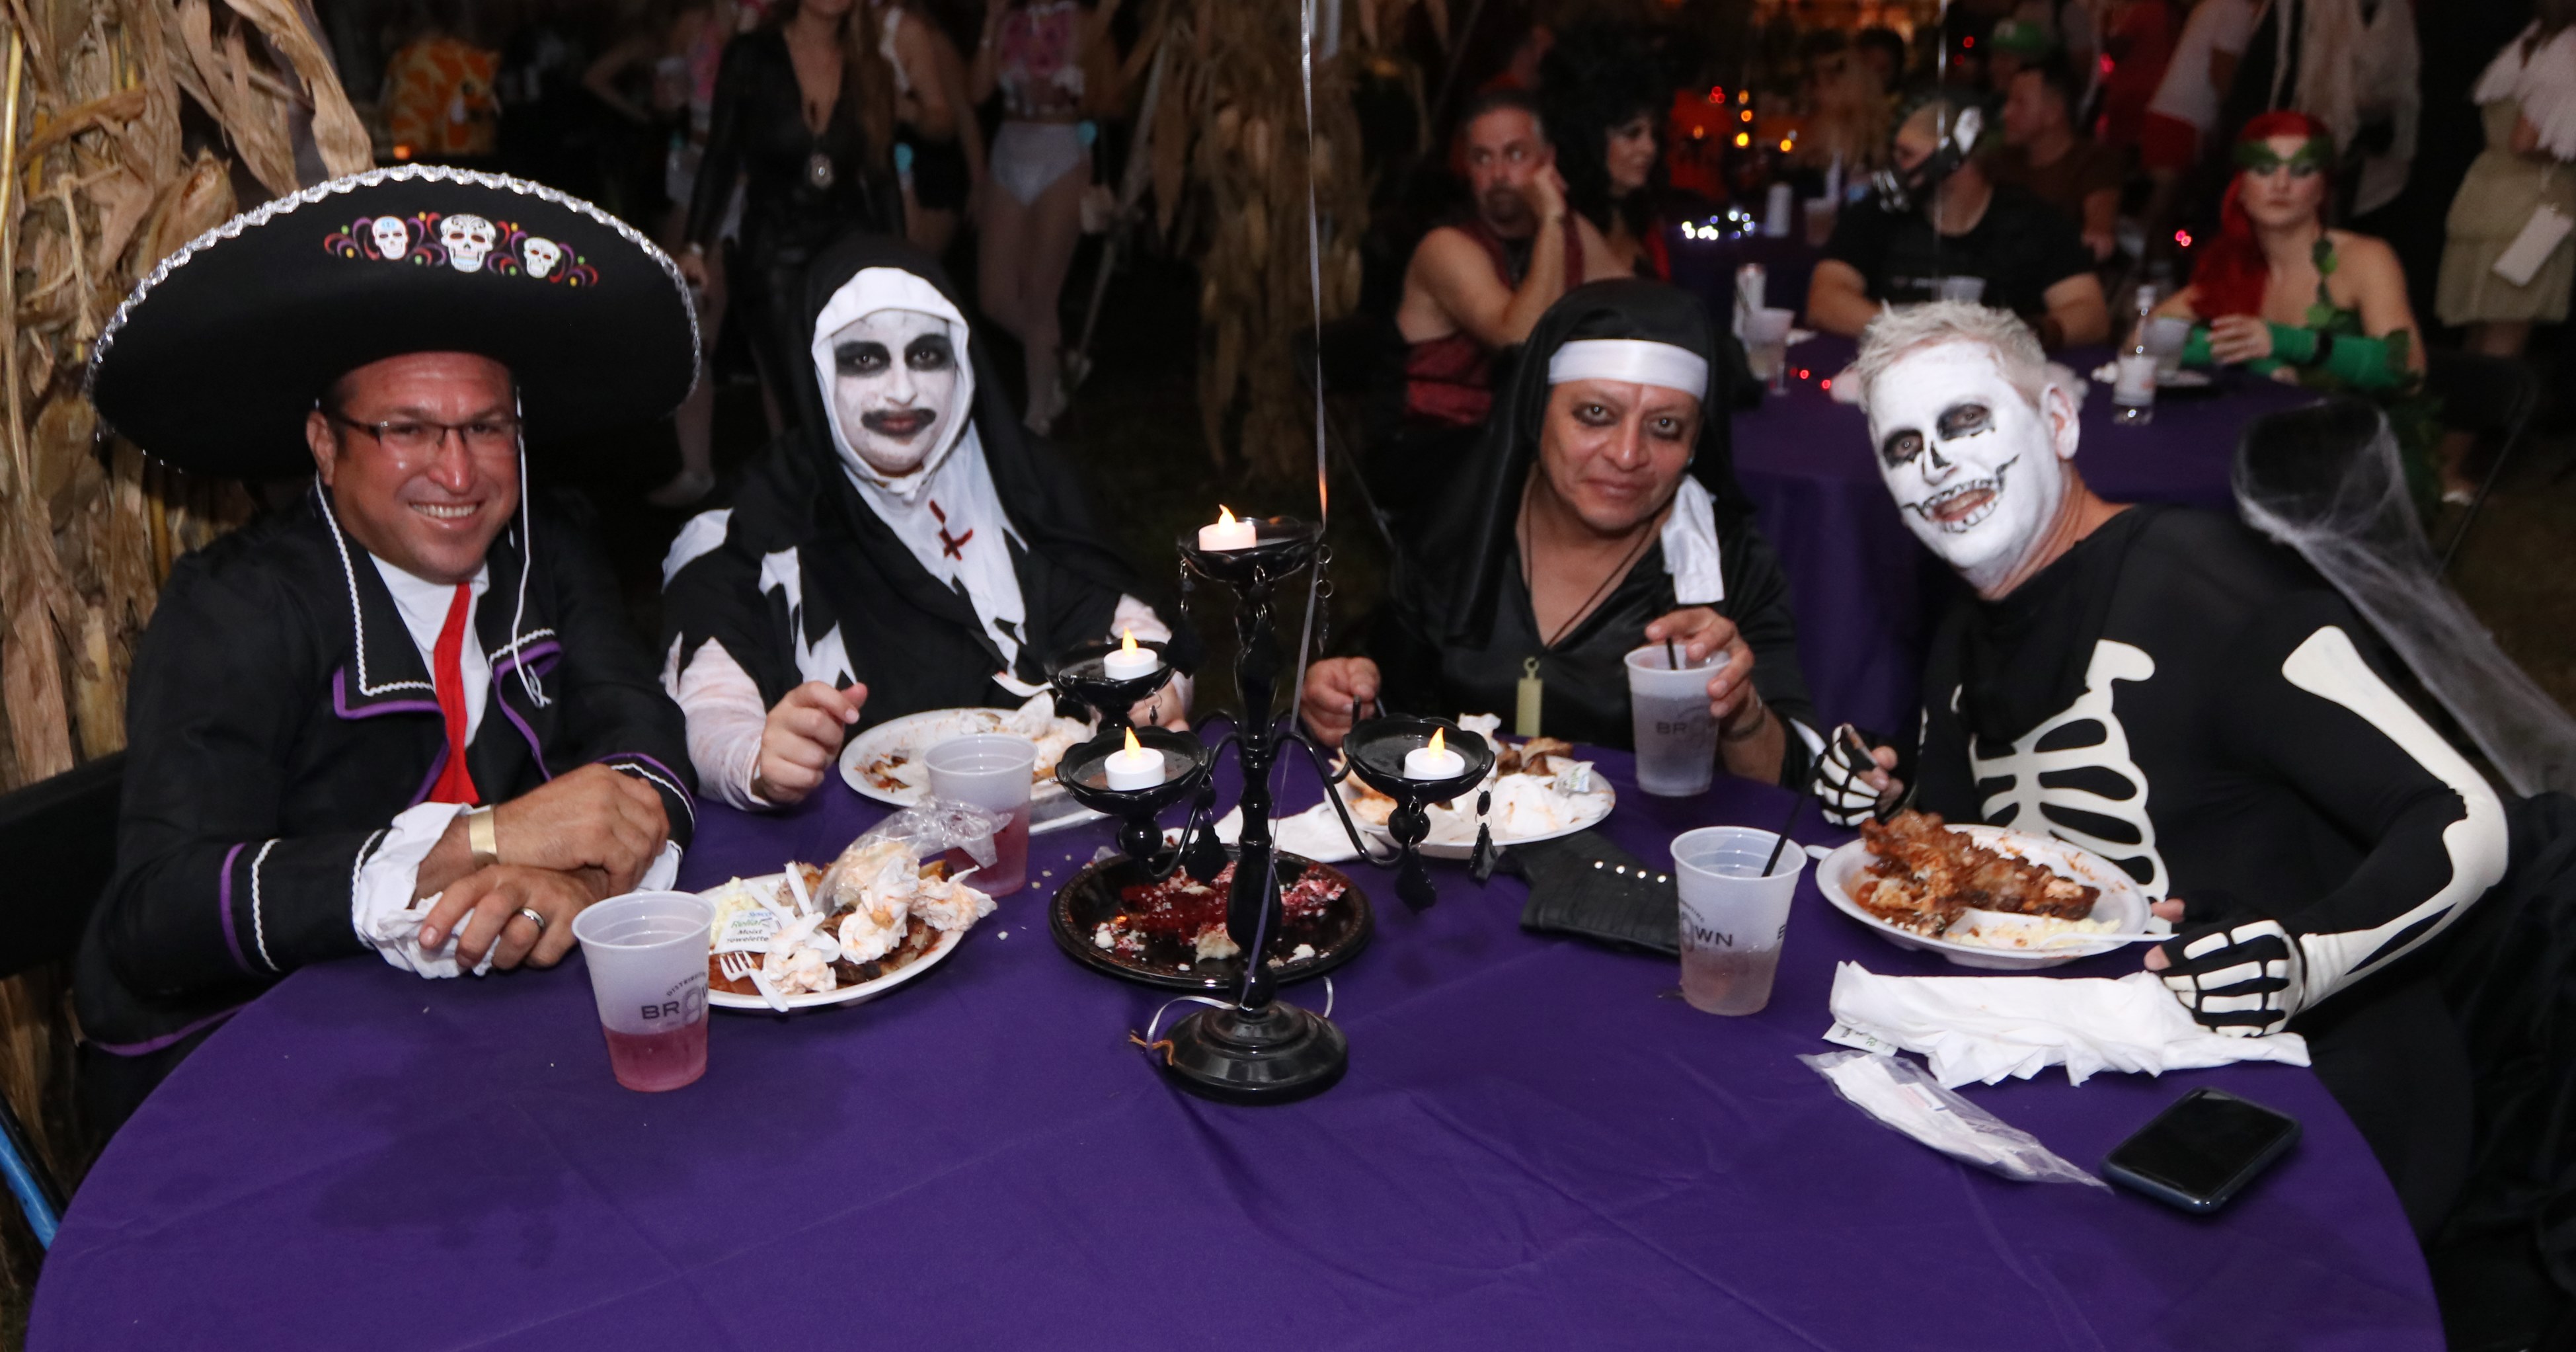 VIP Dinner at Moonfest 2019 (photo by: Mike Jalches)